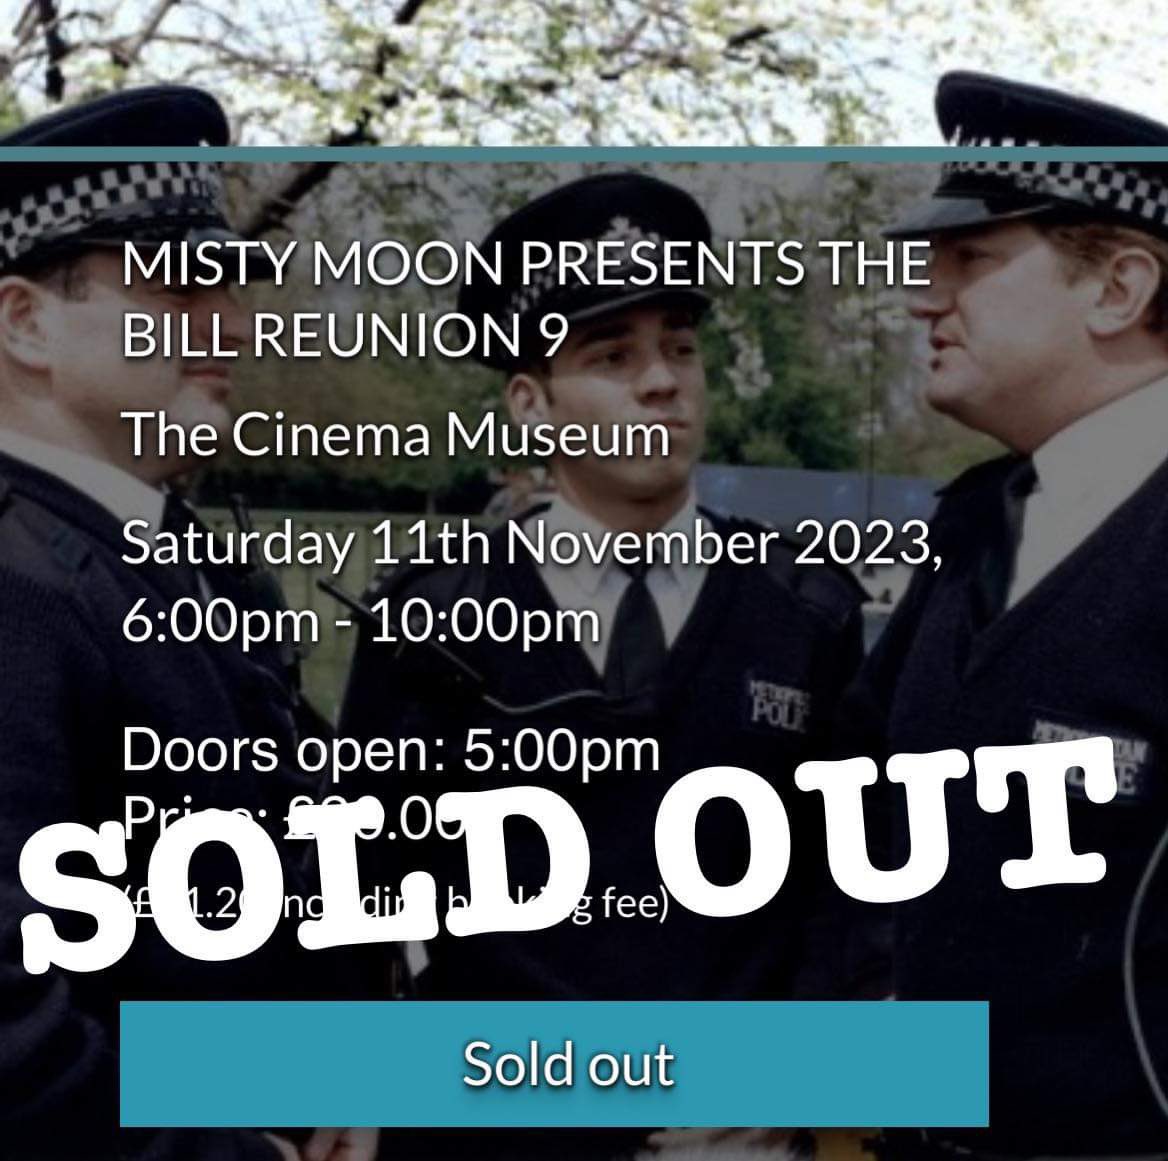 I am happy to announce that Misty Moon’s The Bill Reunion 9 @CinemaMuseum on 11/11 has now SOLD OUT…..@GrahamcoleAct @pickles_carolyn @chrissimmons38 @TomCotcher @TheBillaton @sequinedmoon @TVFilmPodcastUK Tickets for The Bill Reunion 10 on 23/03/24 will go on sale soon…..